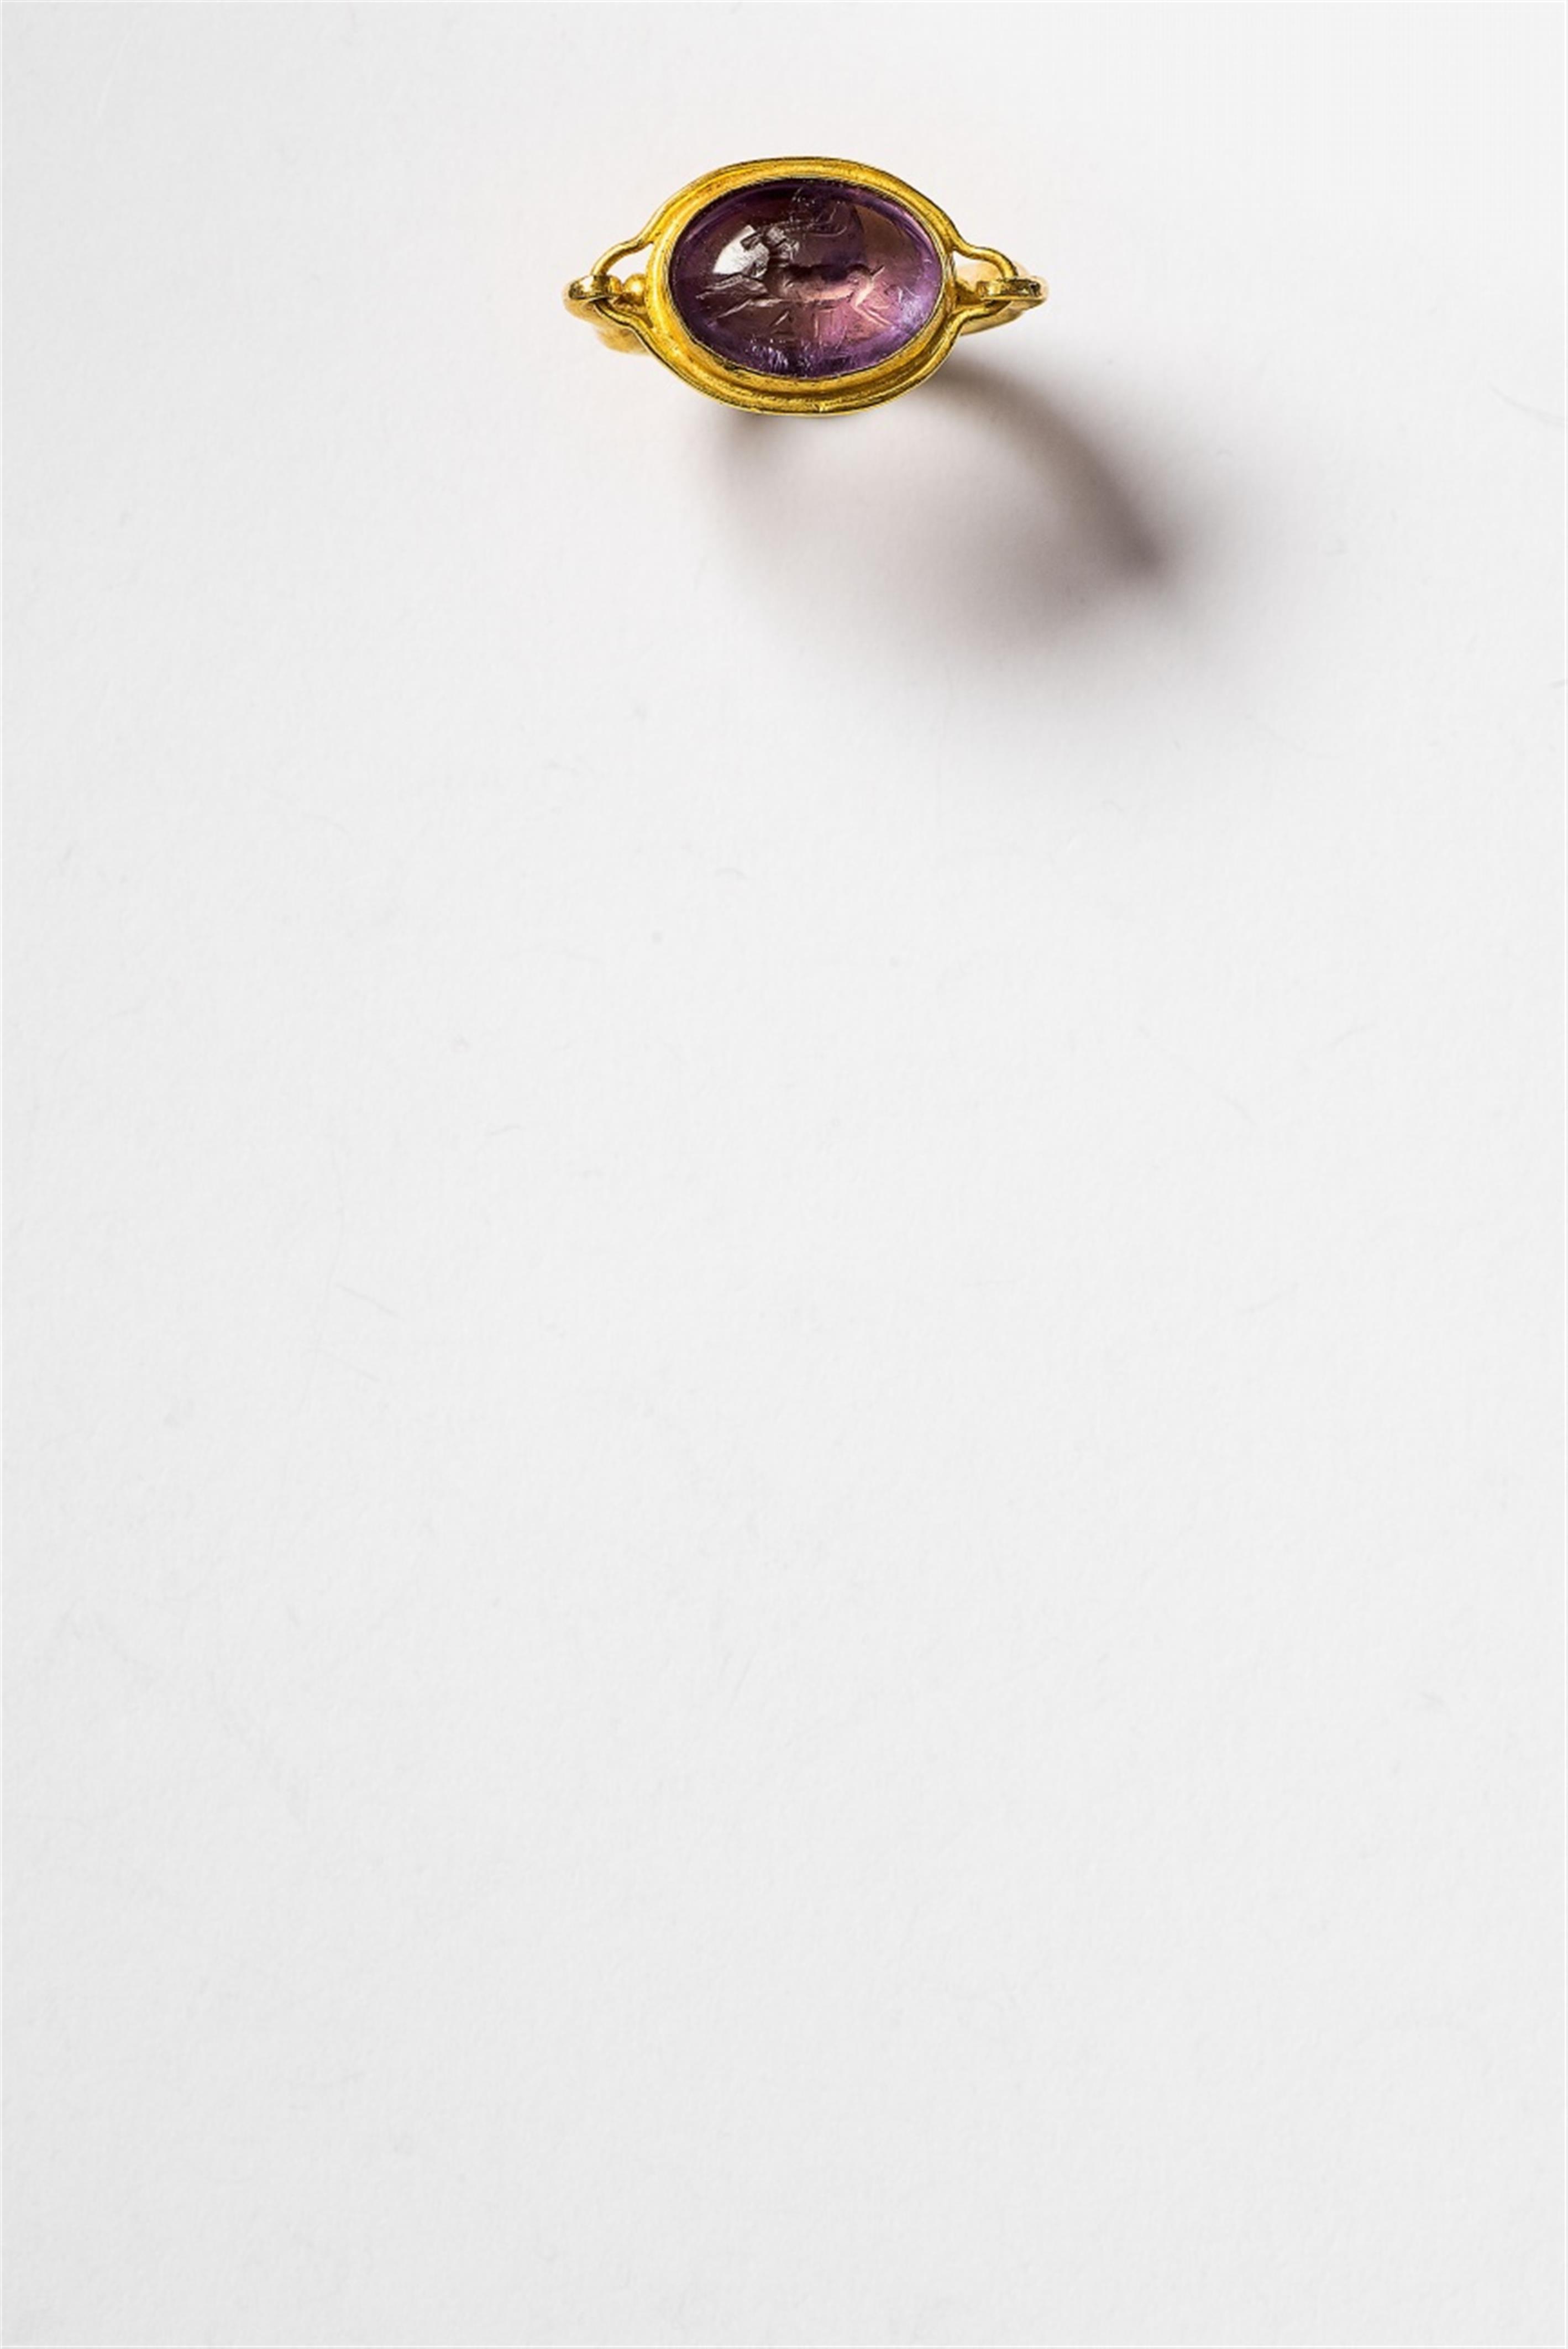 A 21k gold ring with a Roman intaglio - image-2